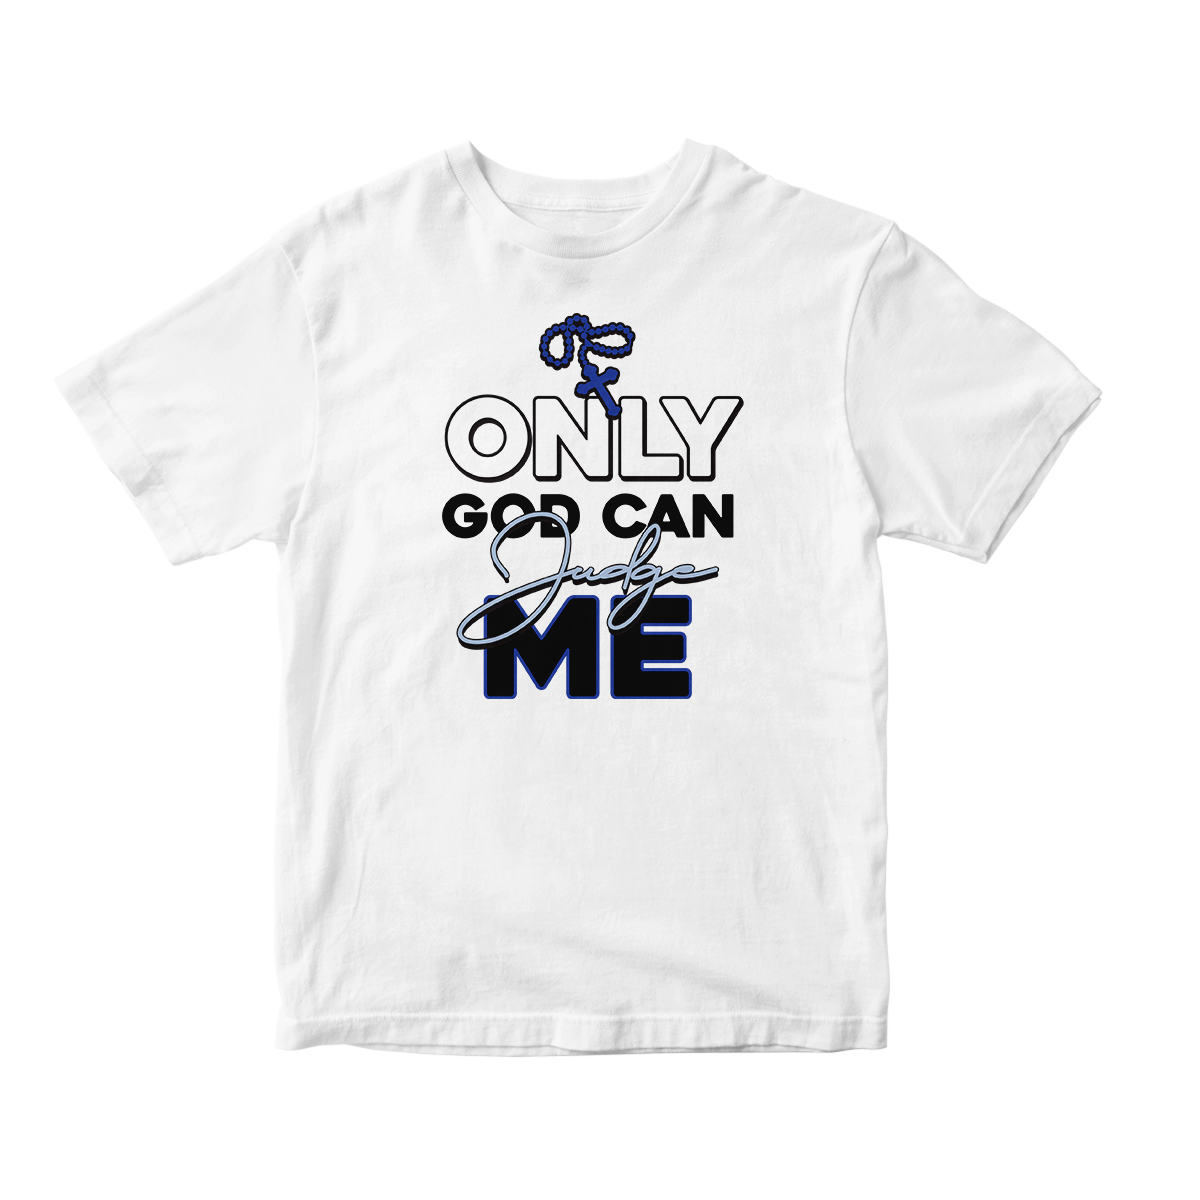 'Only God Can Judge Me' in Space Jam CW Short Sleeve Tee